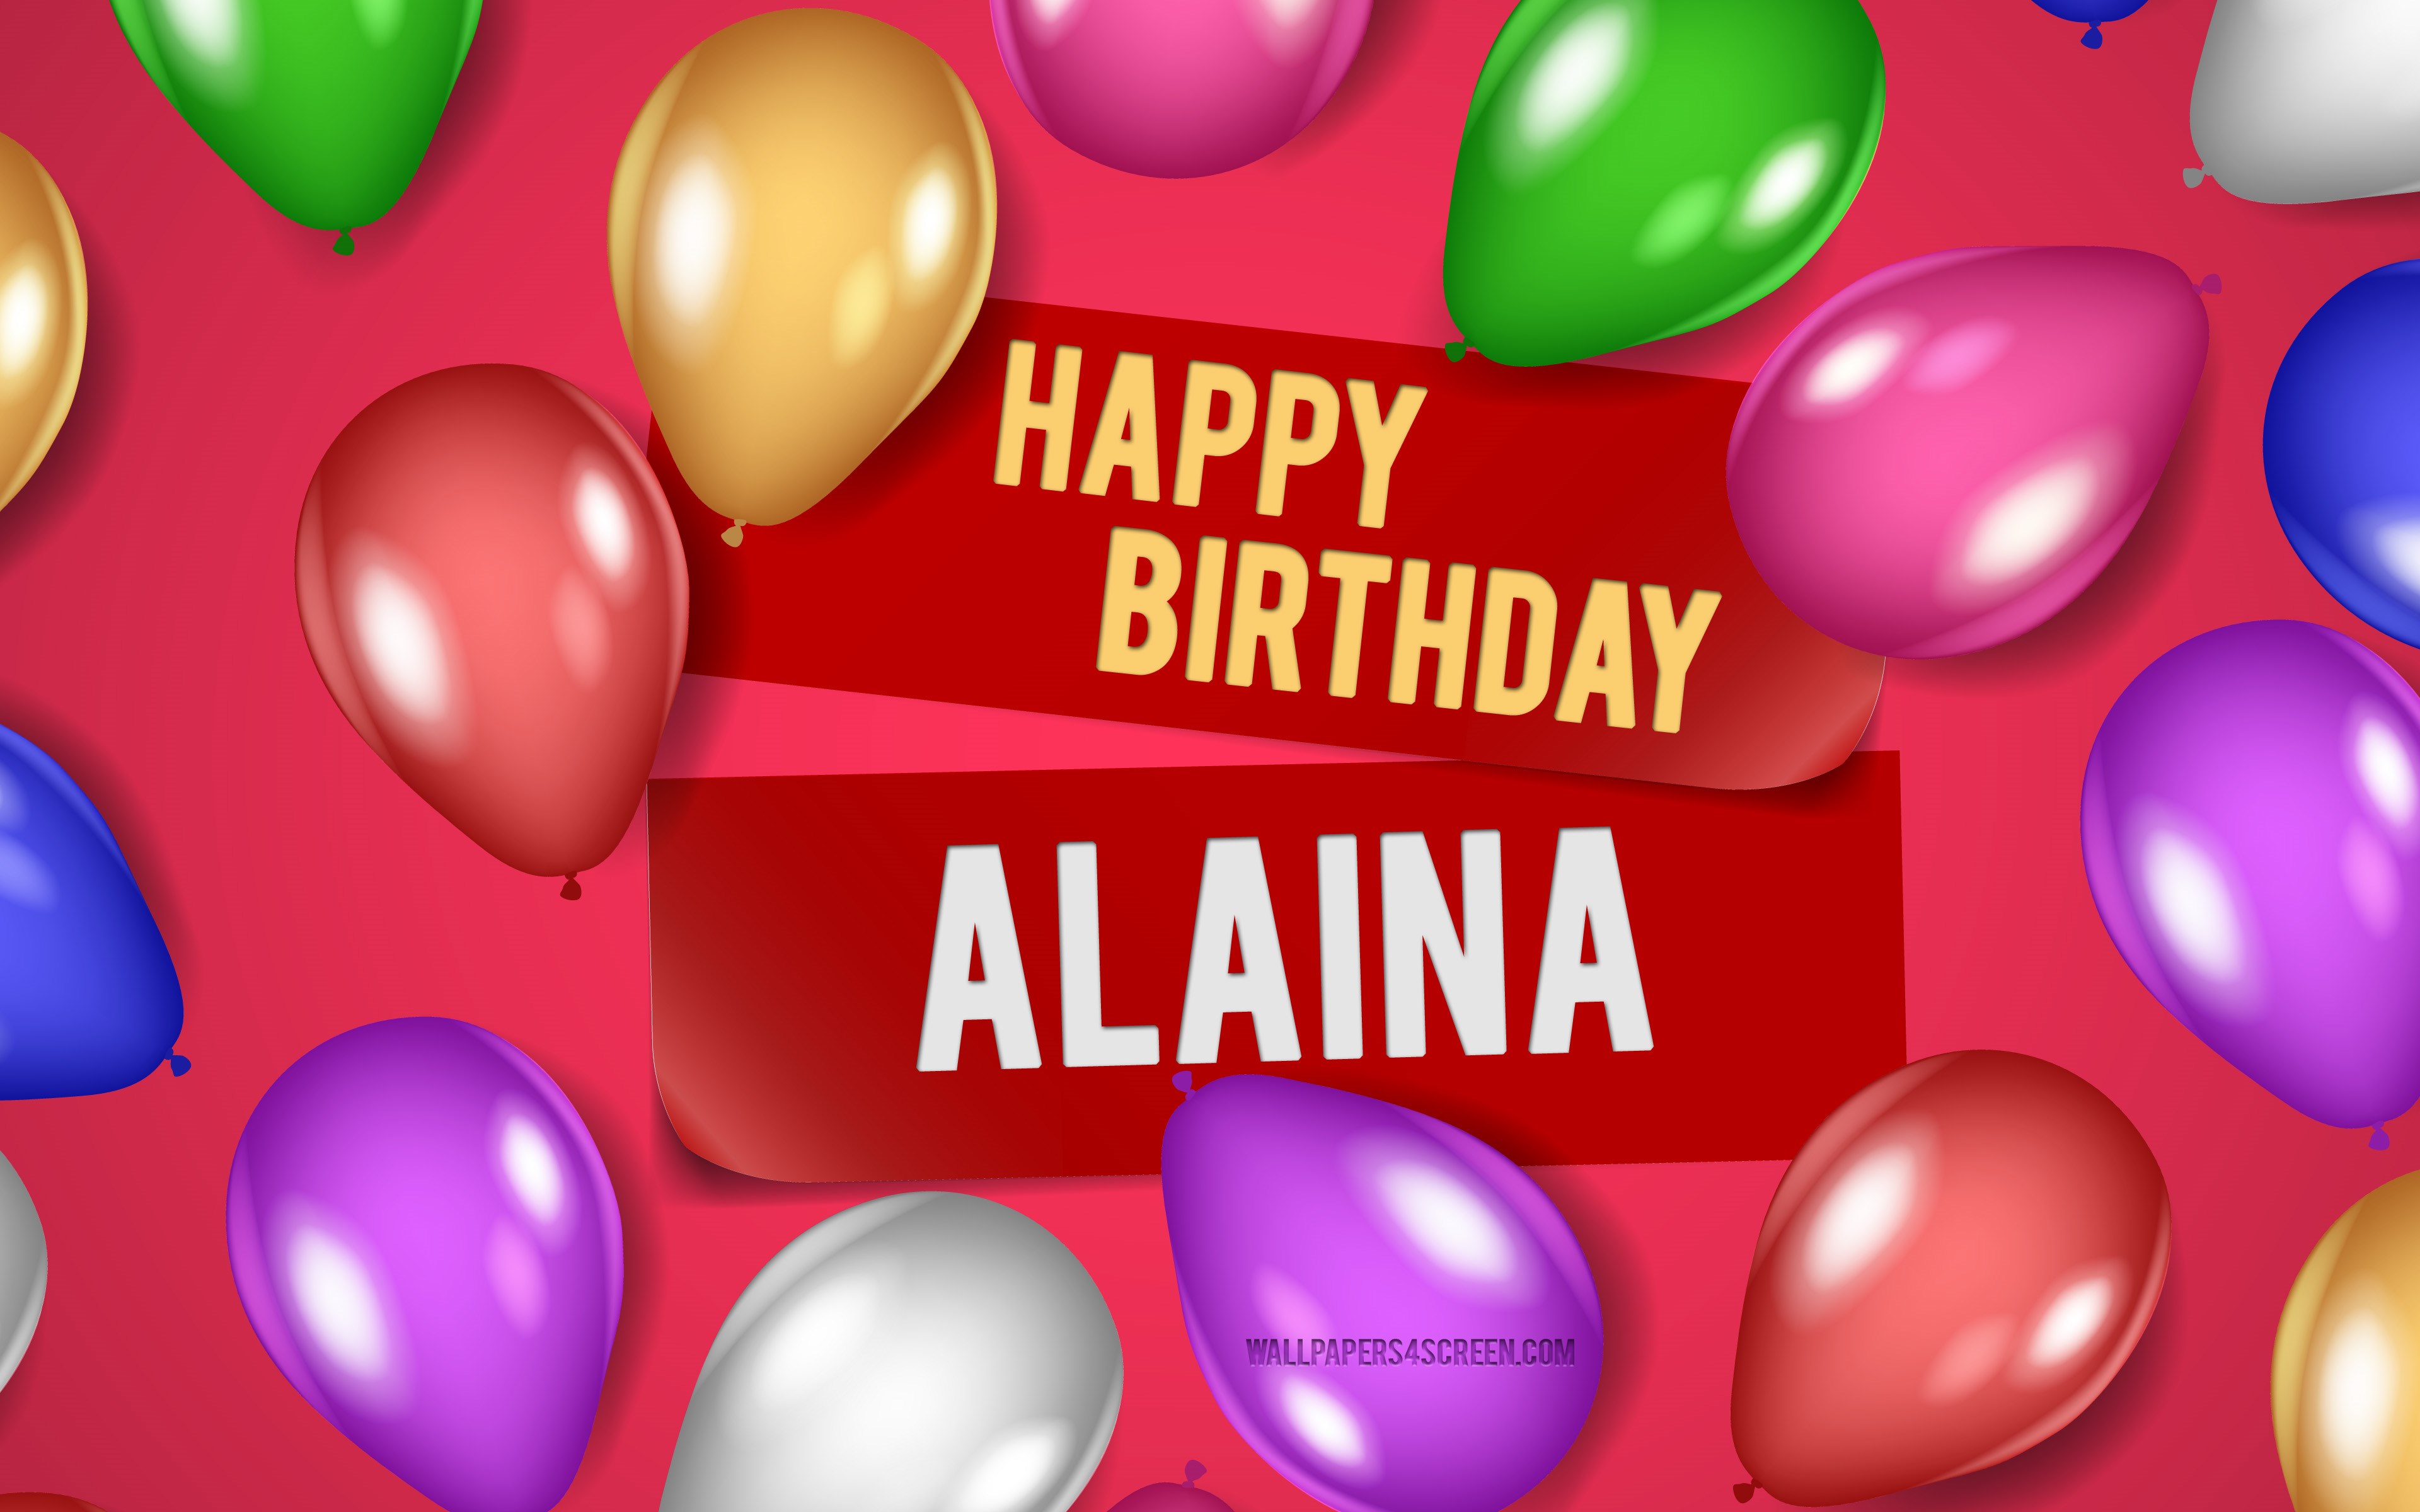 Download Wallpapers 4k Alaina Happy Birthday Pink Backgrounds Alaina Birthday Realistic